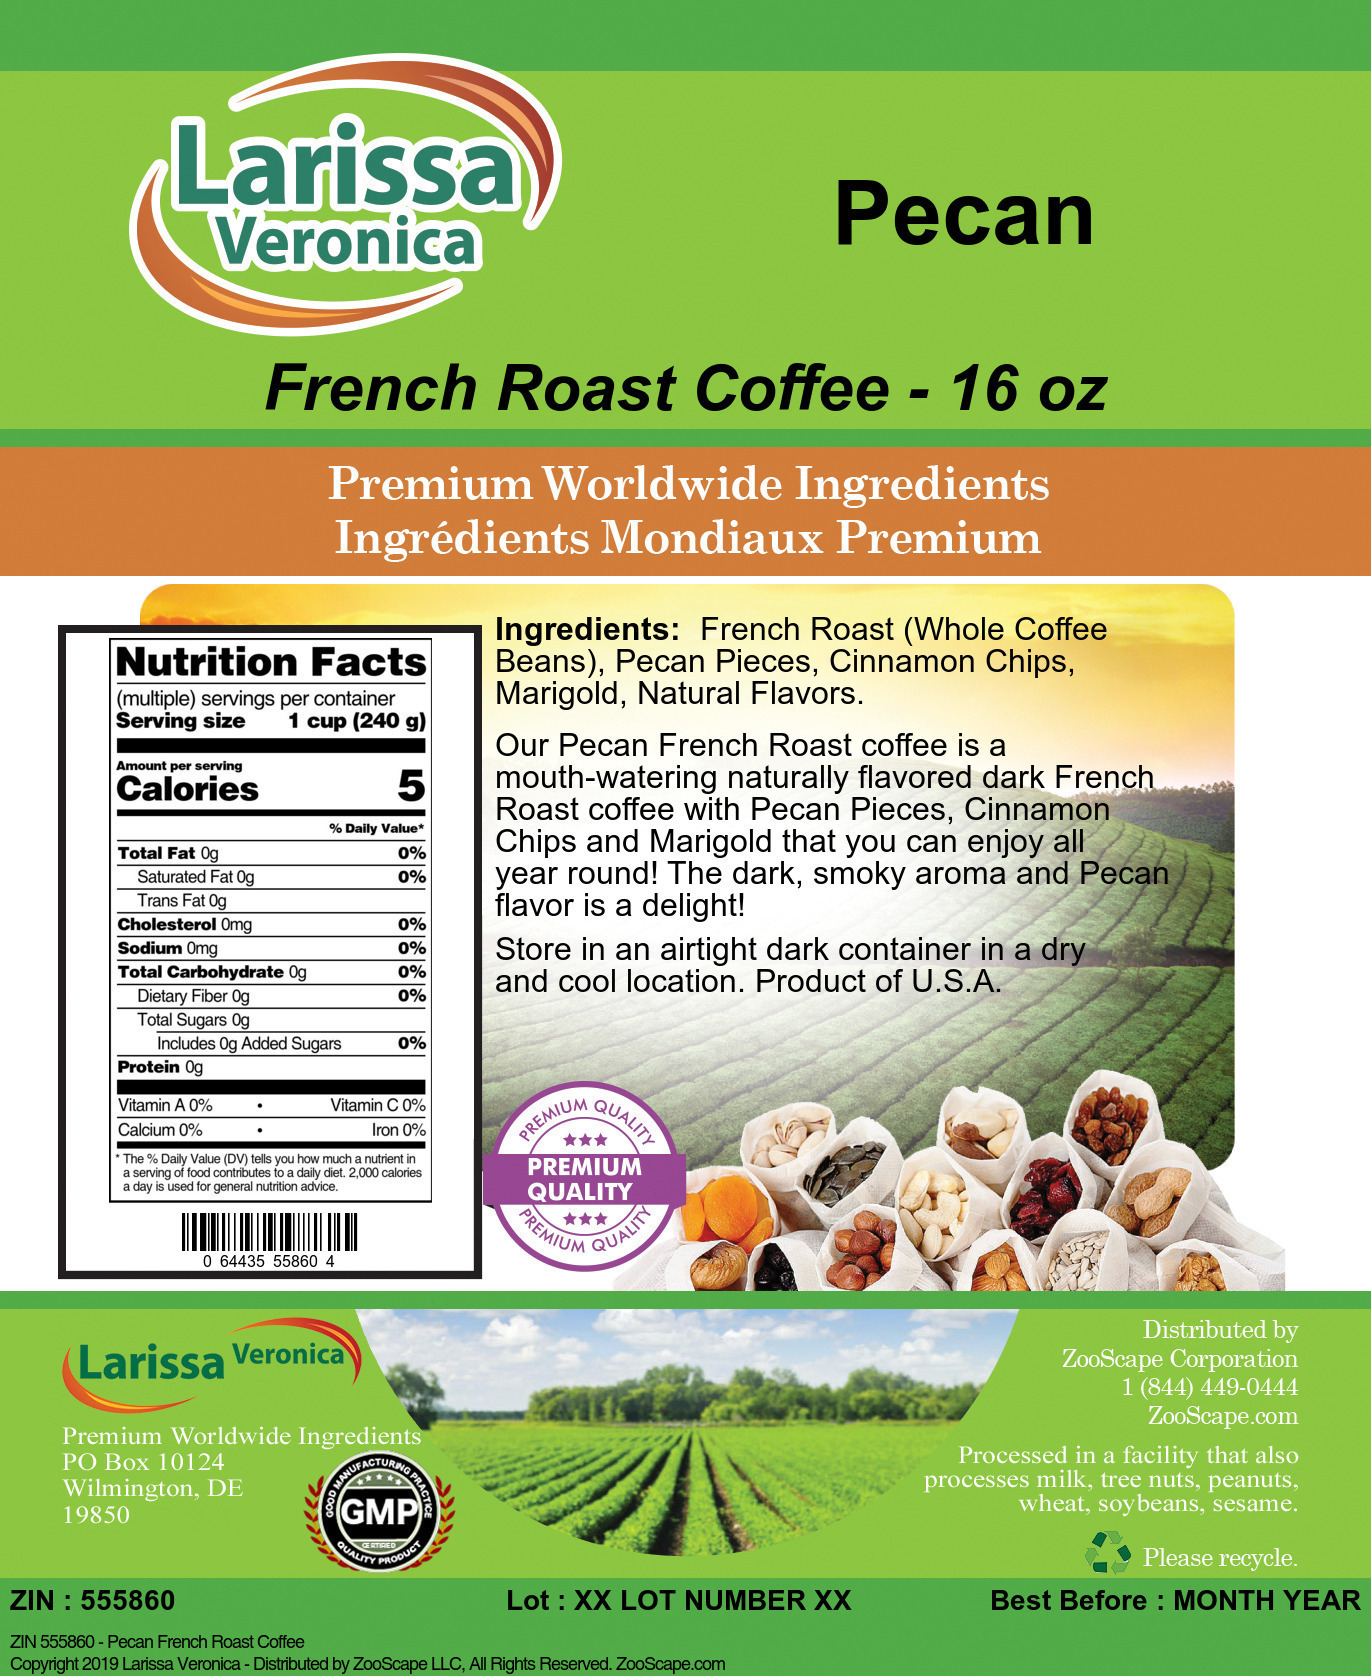 Pecan French Roast Coffee - Label